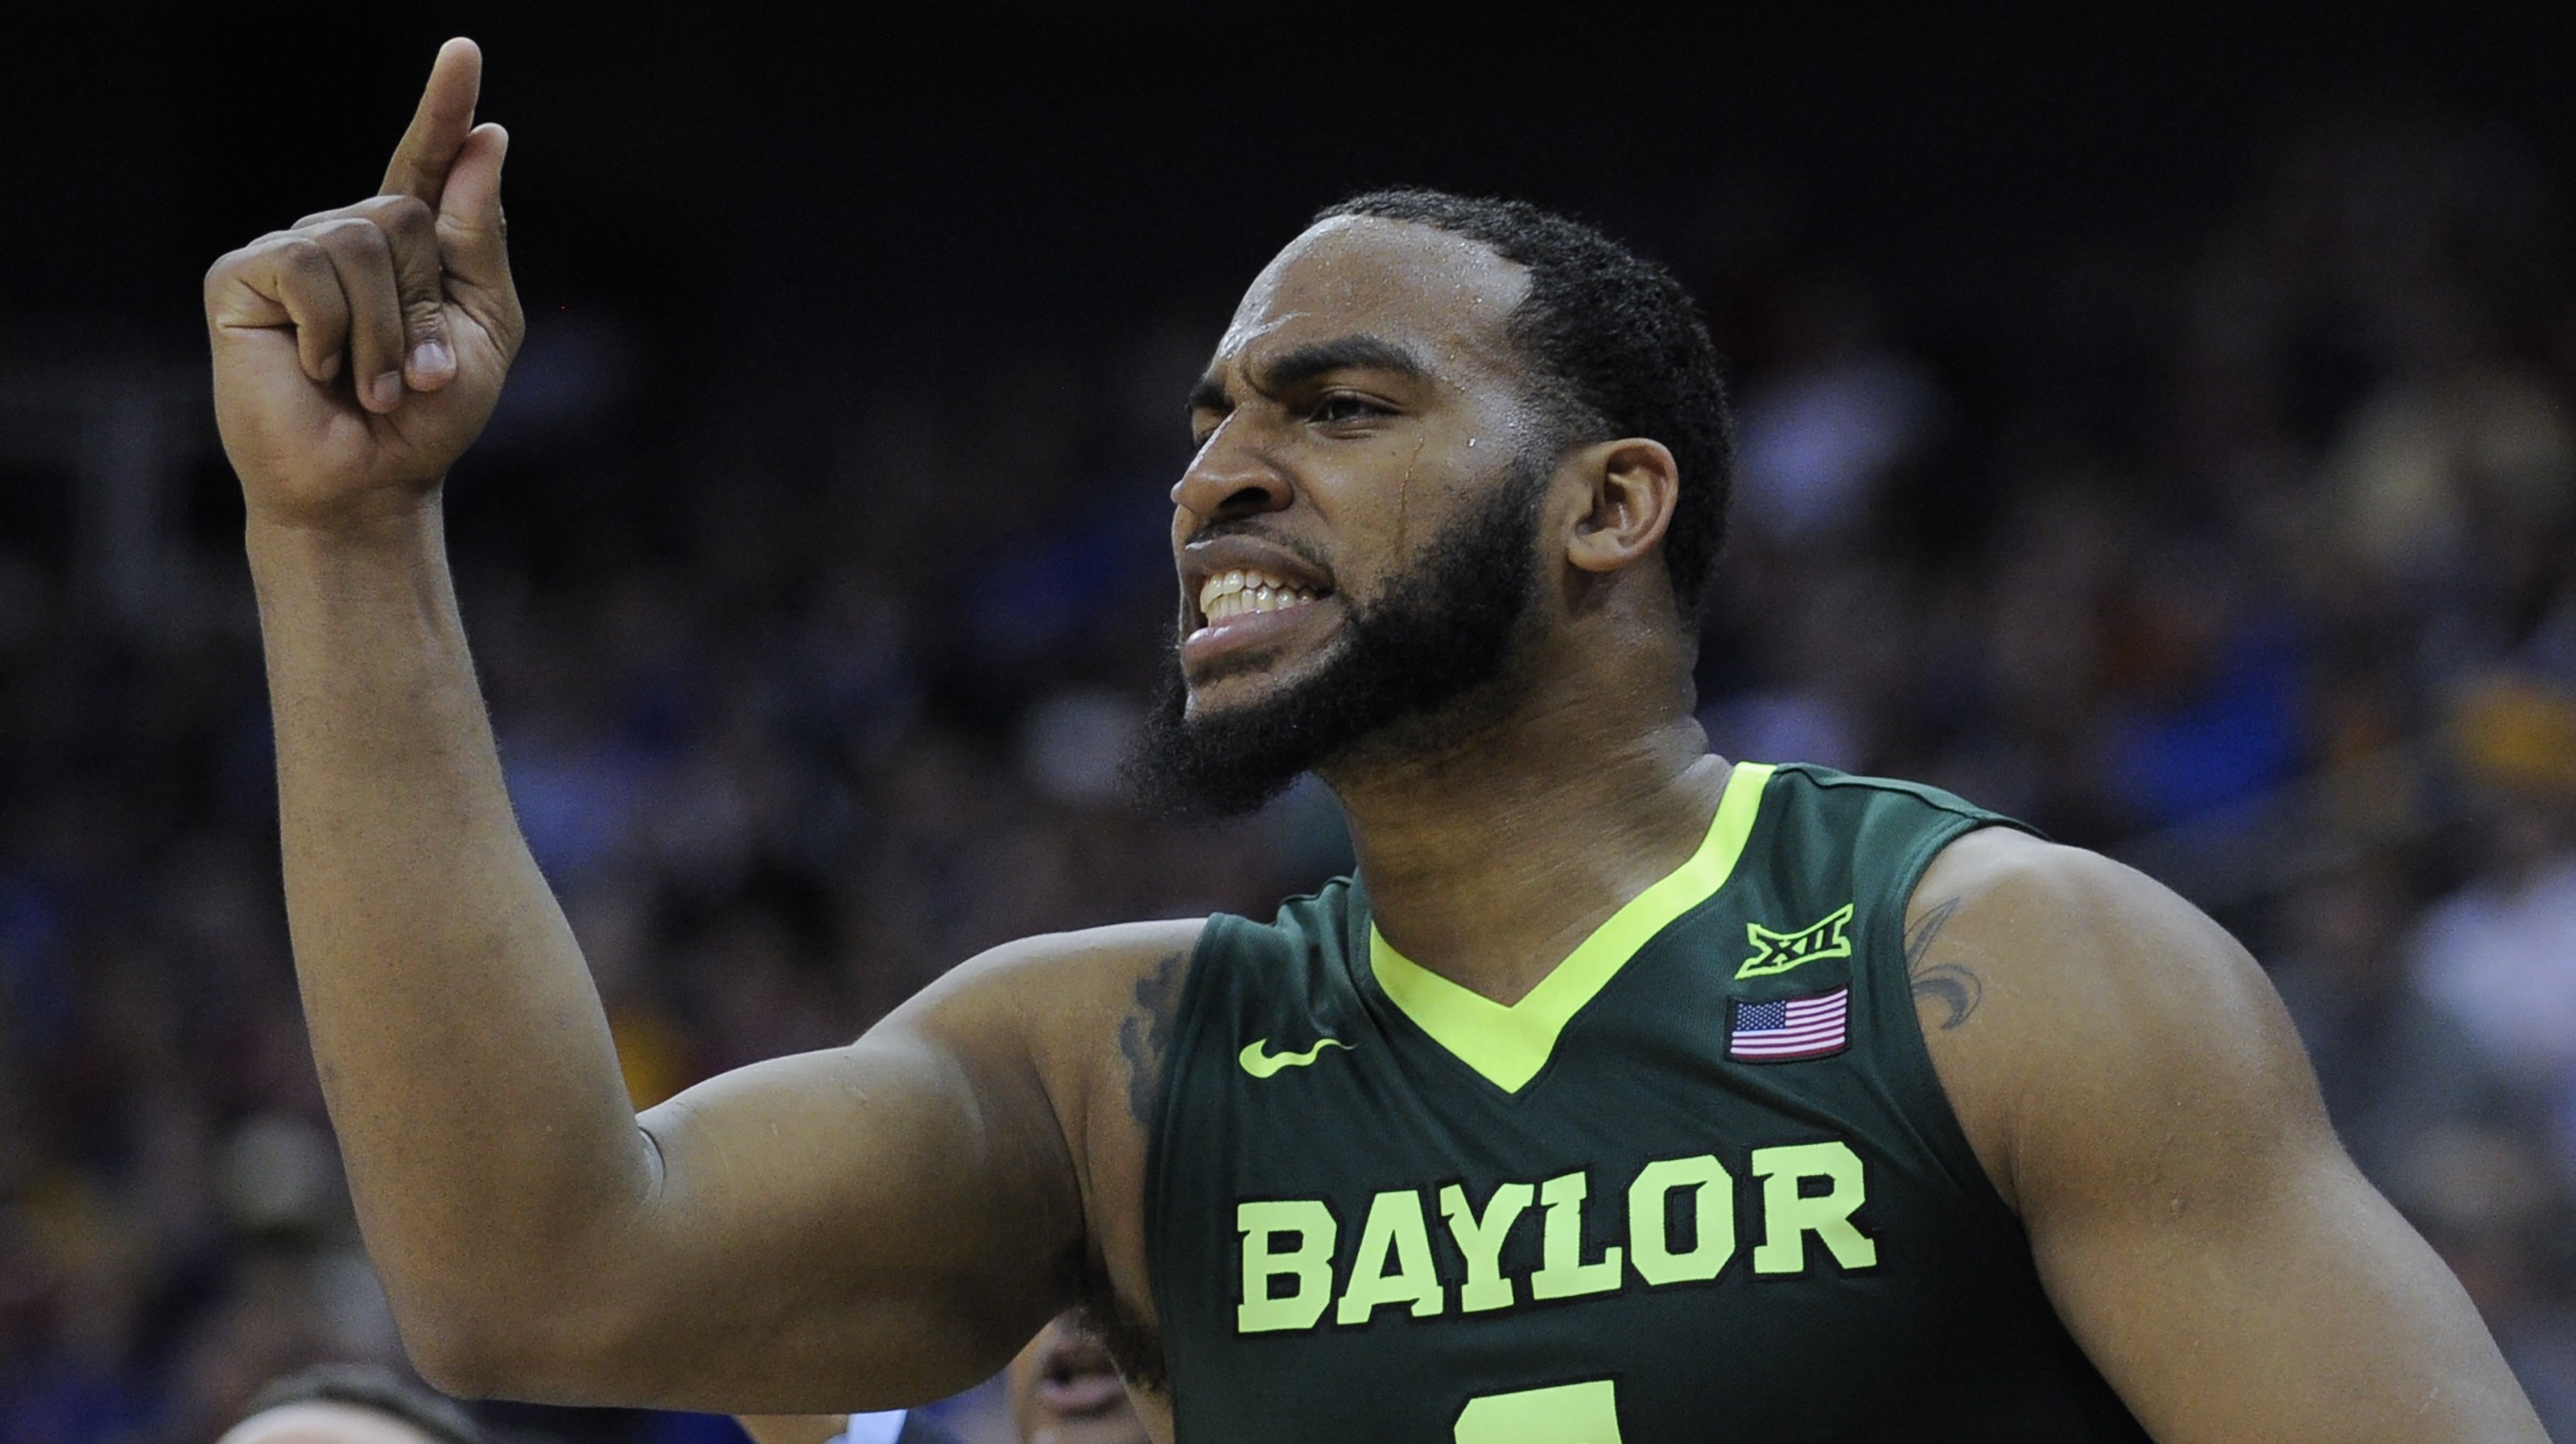 Baylor vs. Yale March Madness Preview